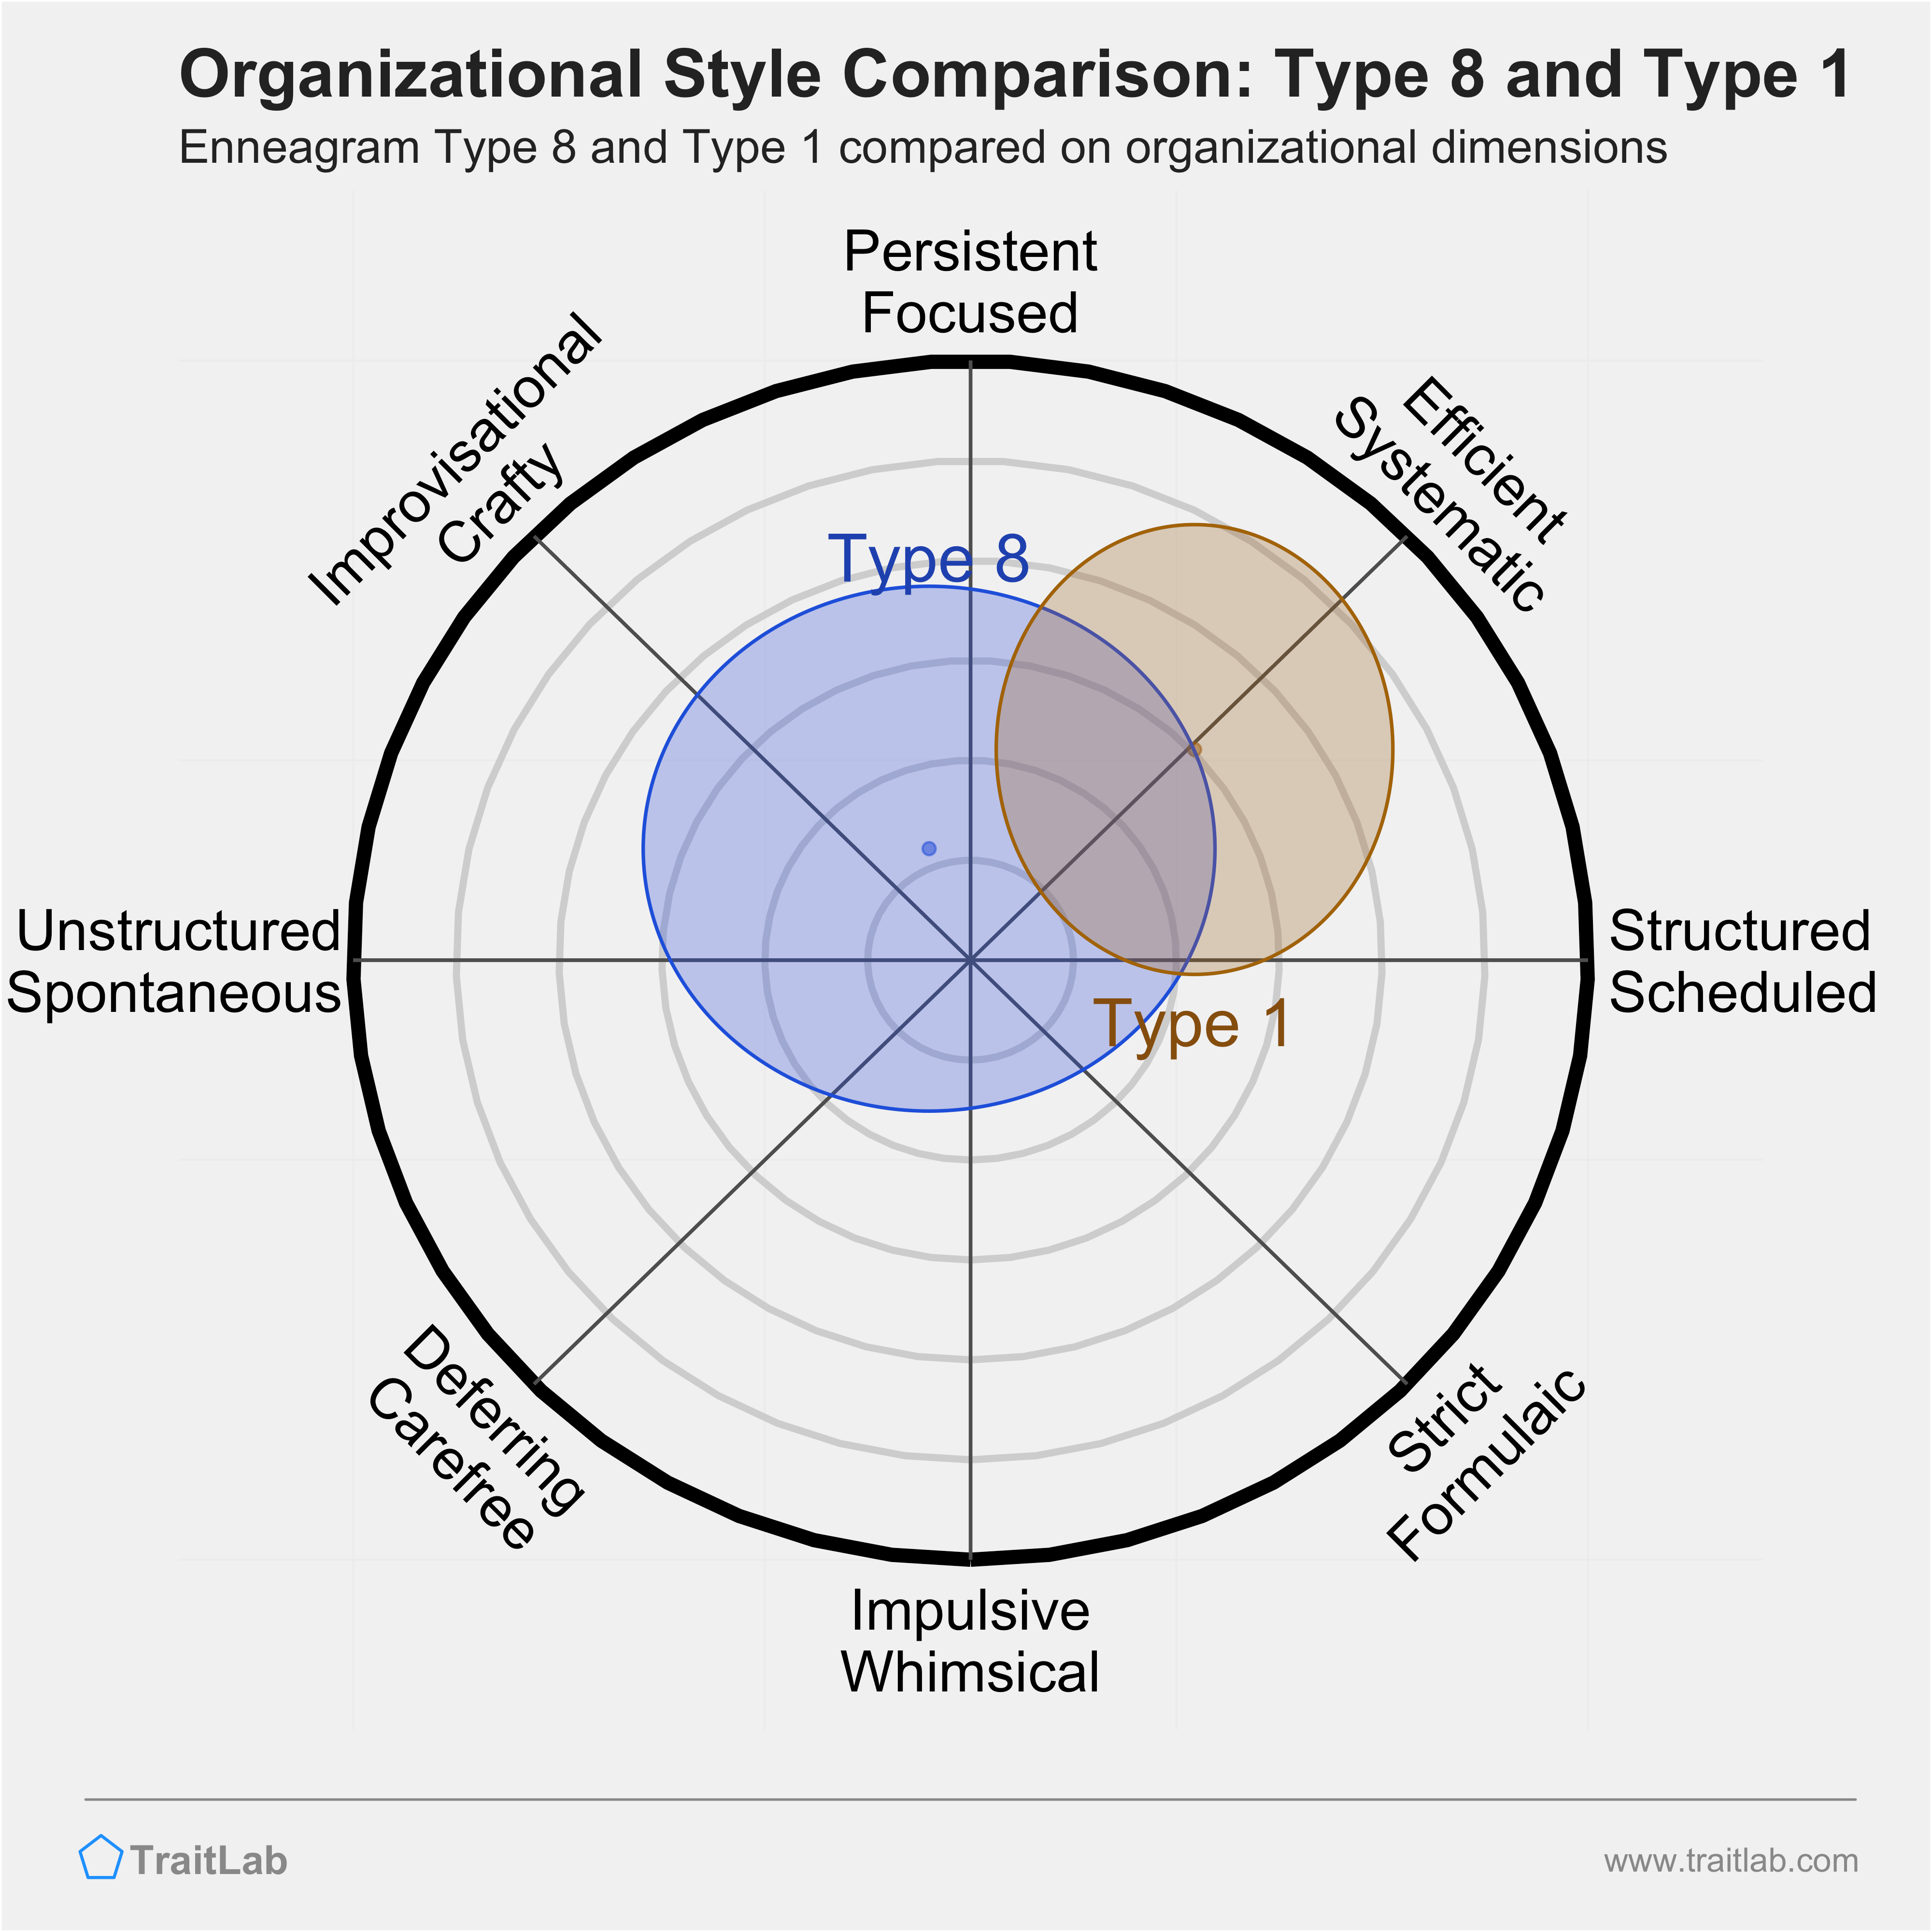 Type 8 and Type 1 comparison across organizational dimensions